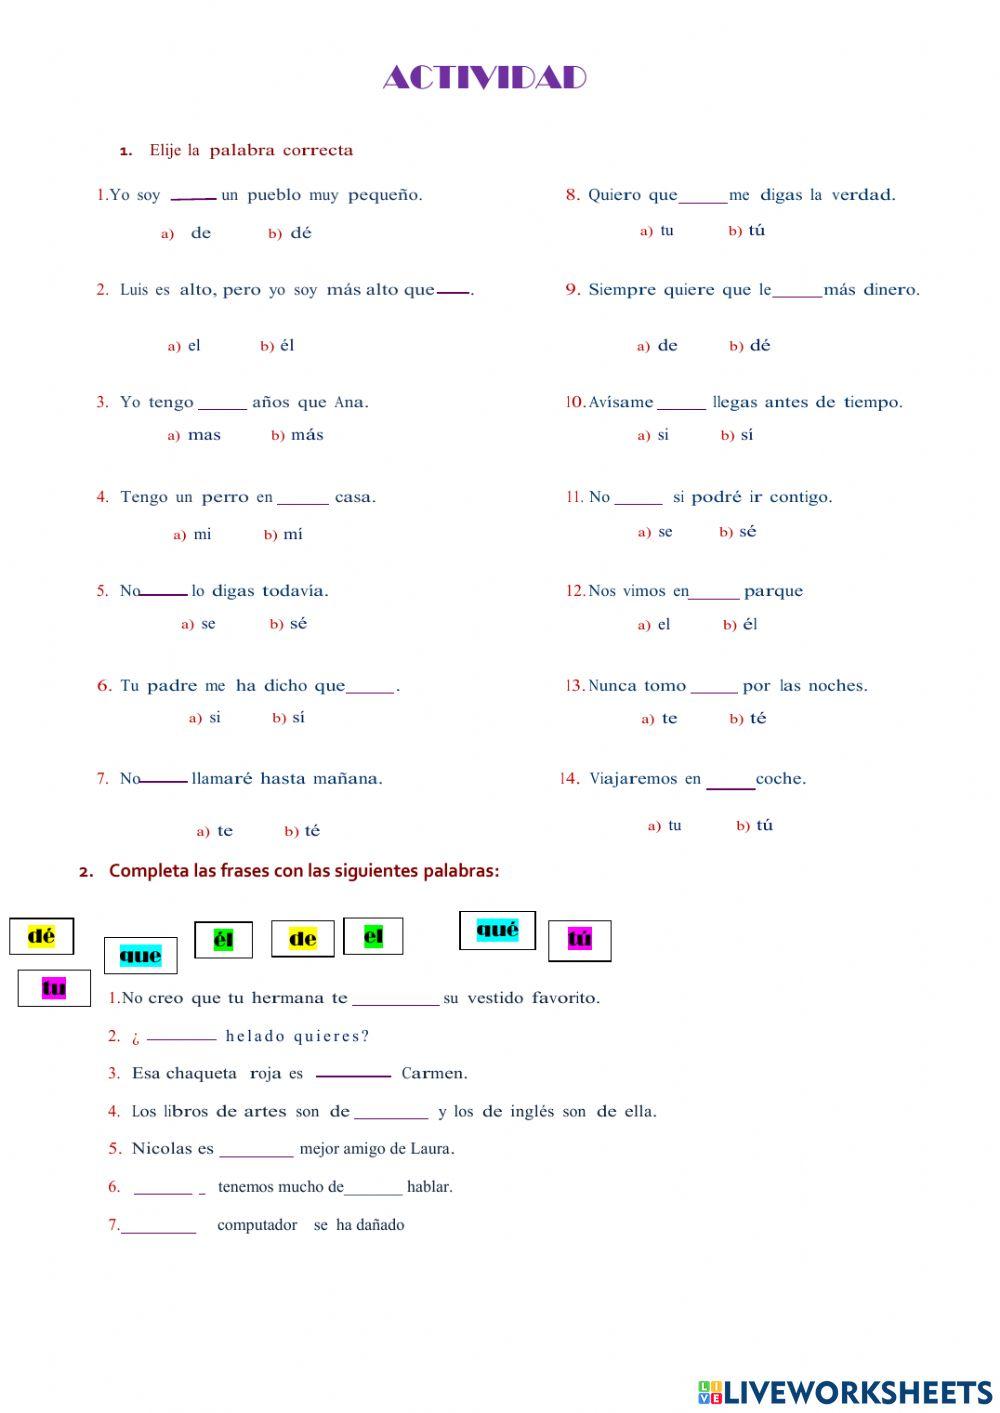 Ejercicios acento diacritico worksheet | Live Worksheets